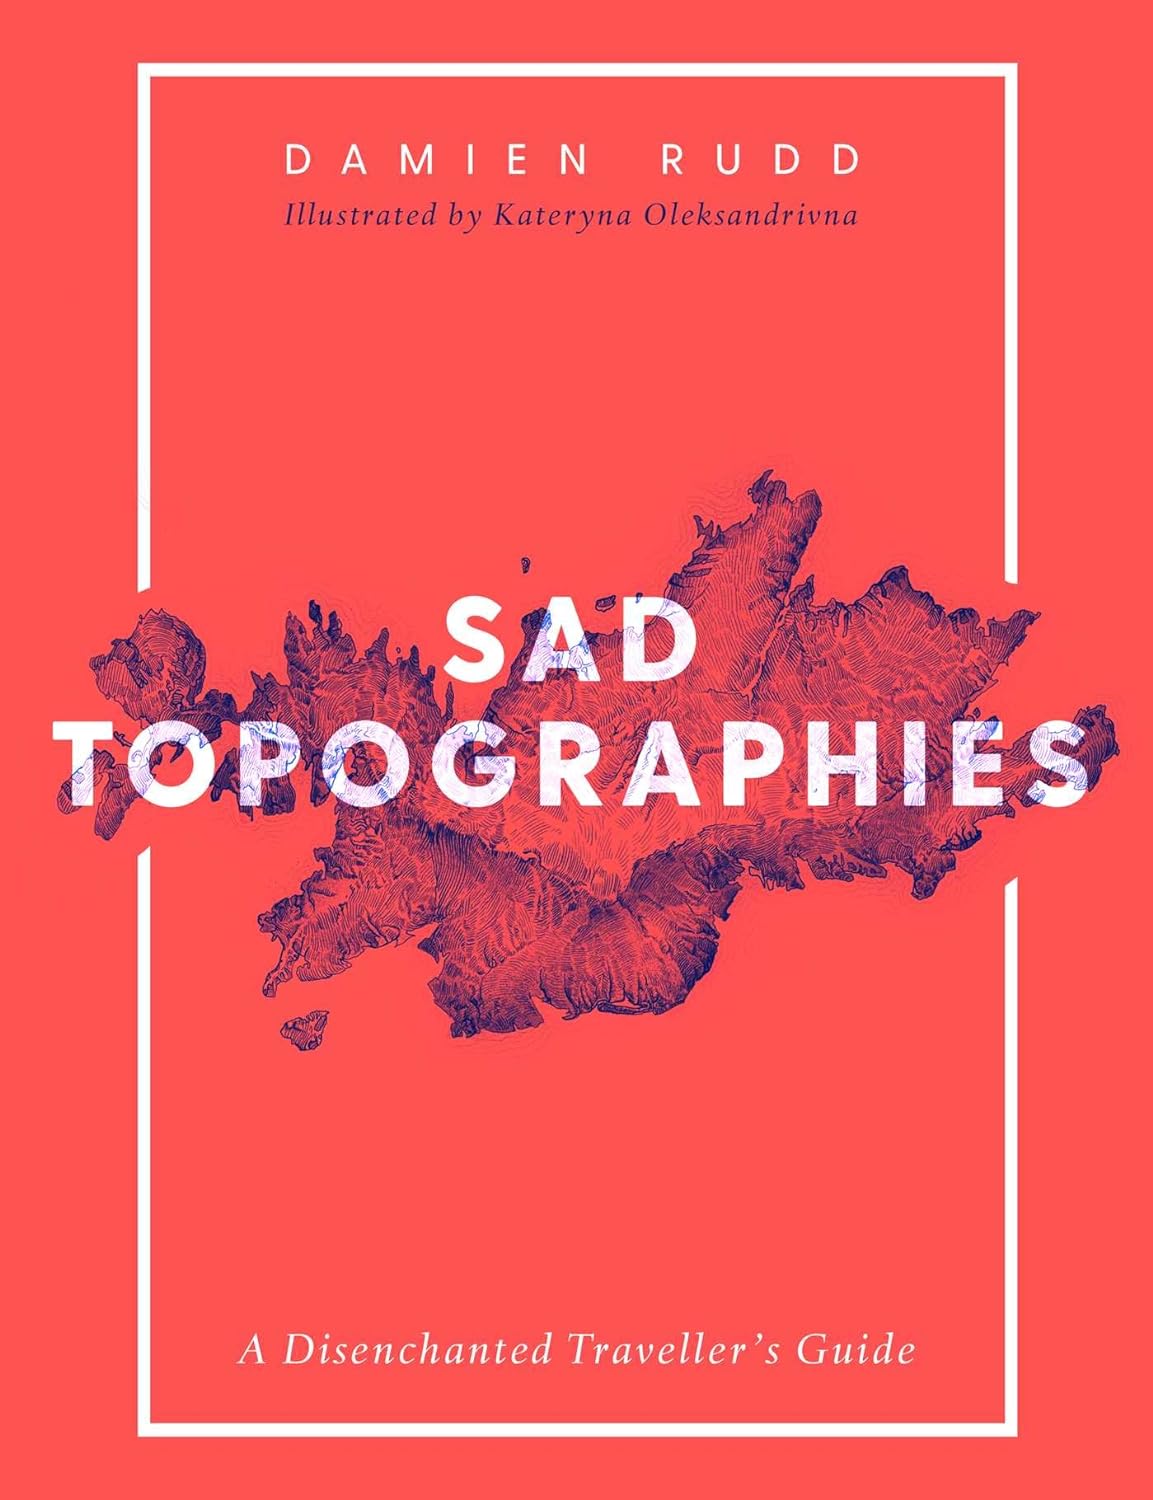 Sad Topographies: A Disenchanted Traveller's Guide